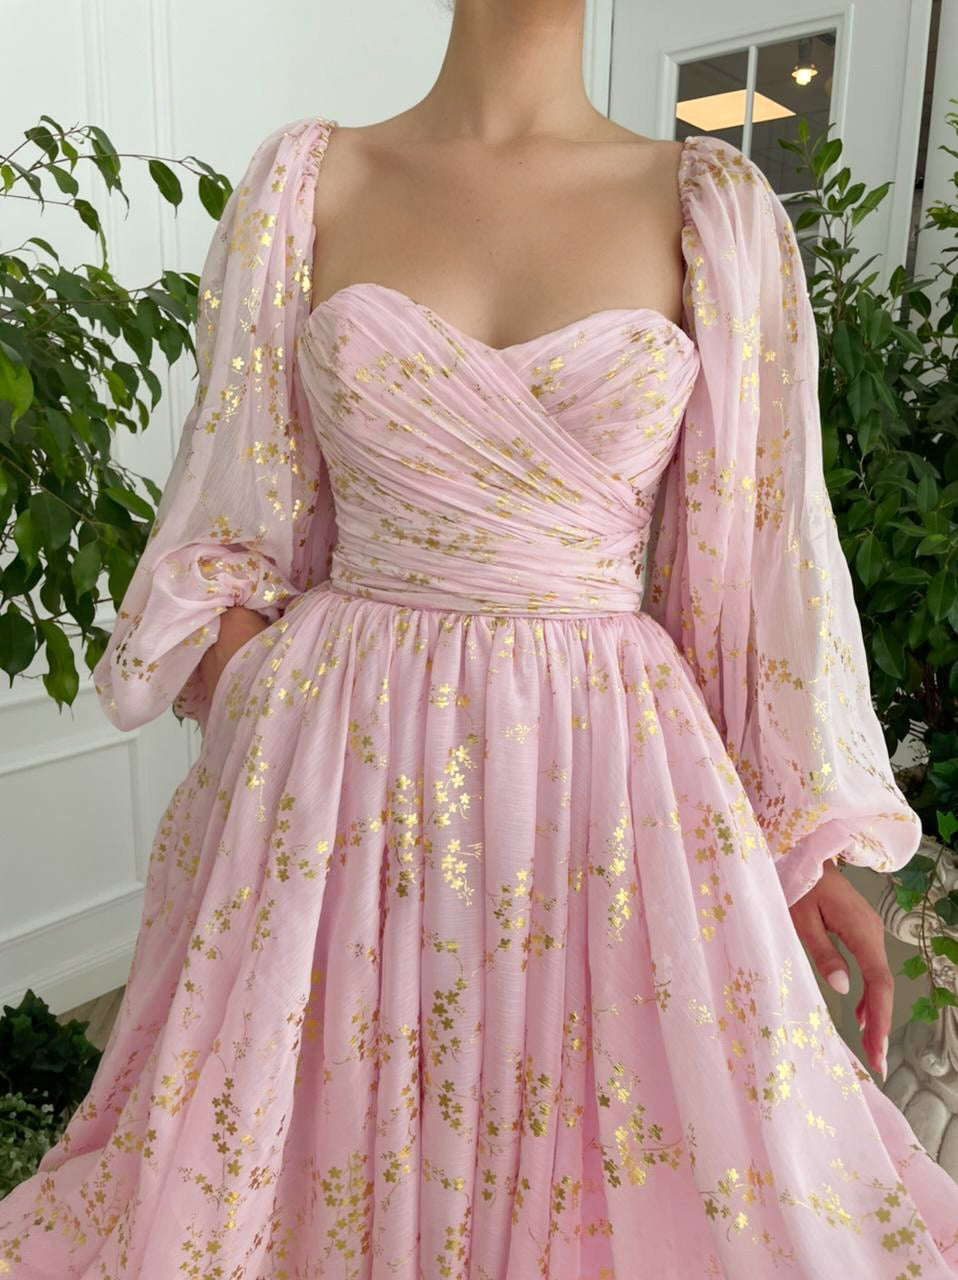 dress with cherry blossoms